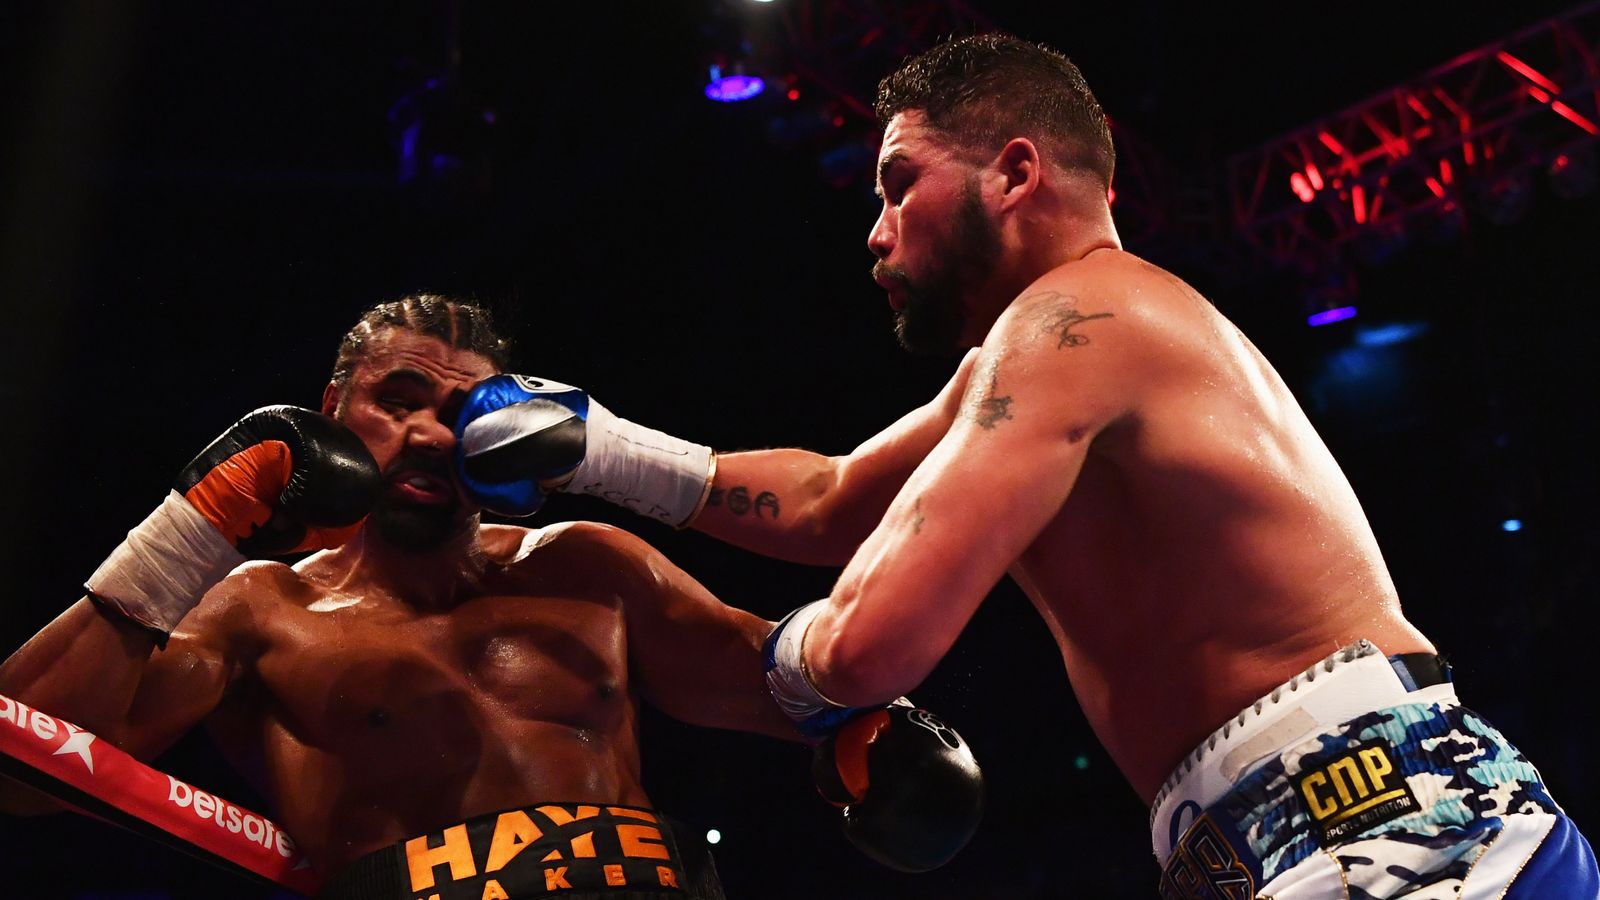 Tony Bellew won't wait for David Haye, warns trainer Dave Coldwell ...